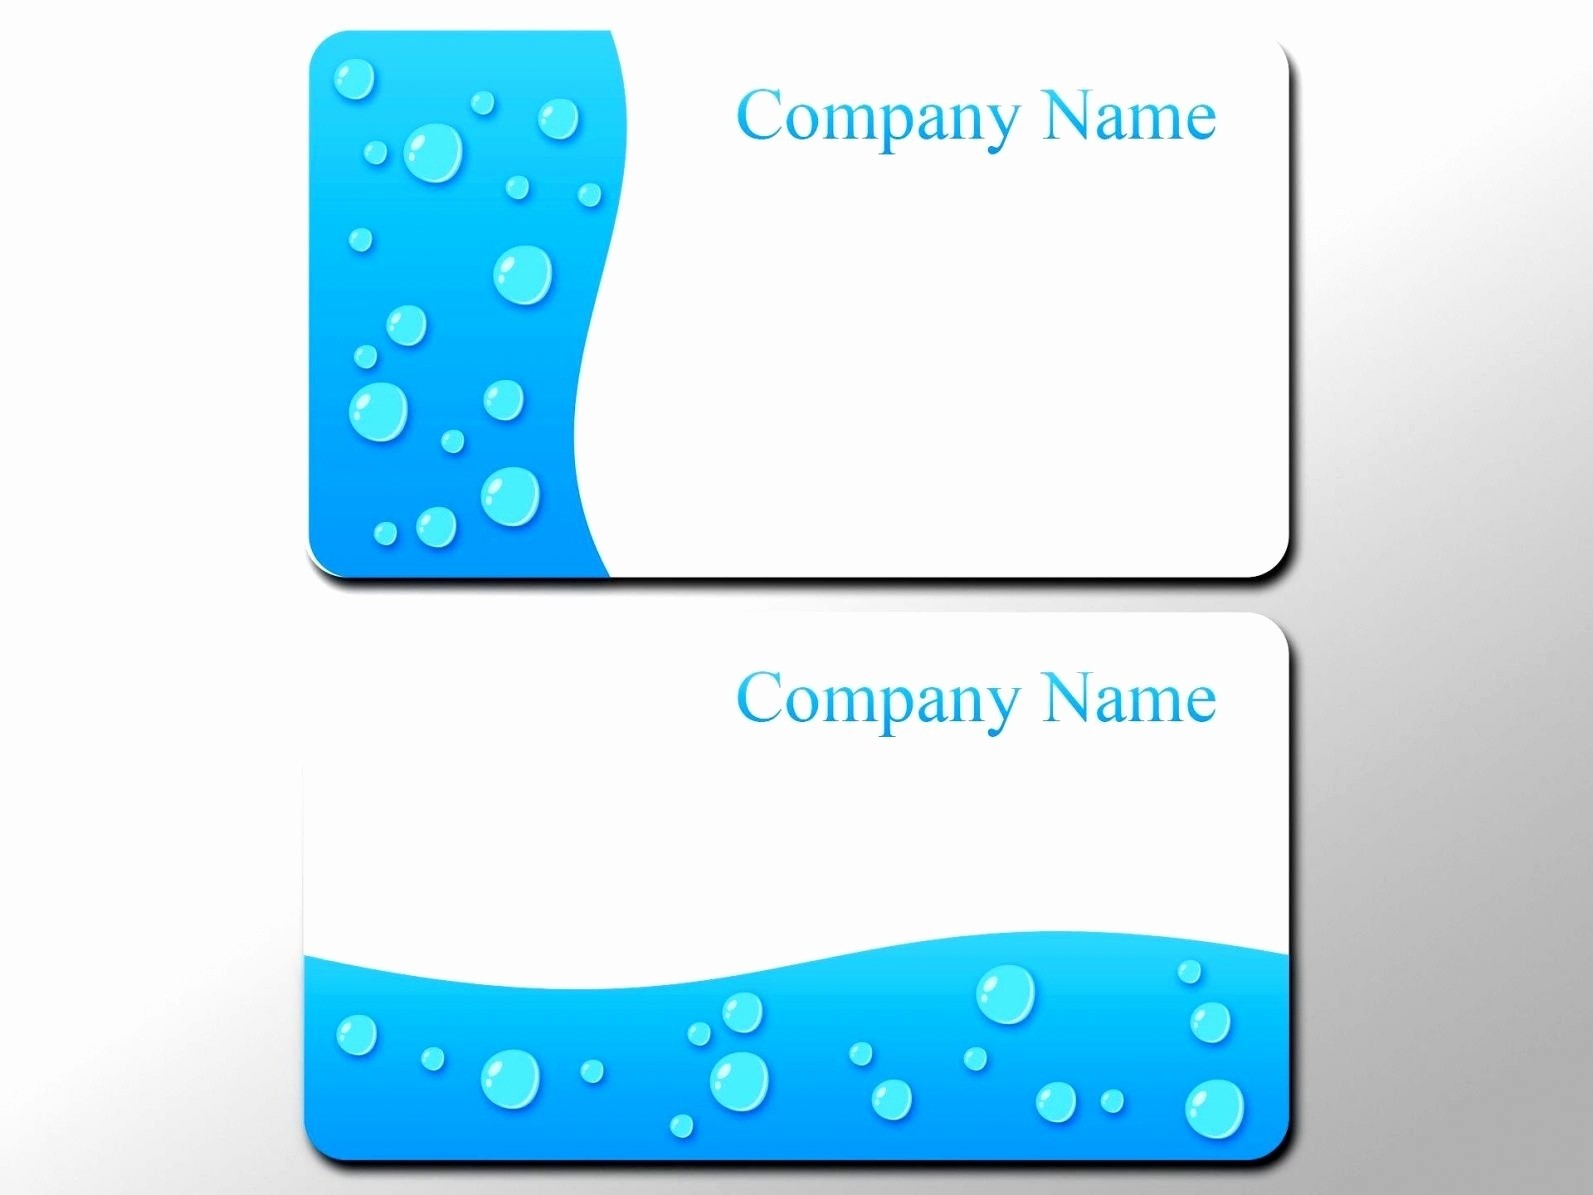 Business Card Format Photoshop Template Cc Beautiful For Throughout Business Card Size Photoshop Template